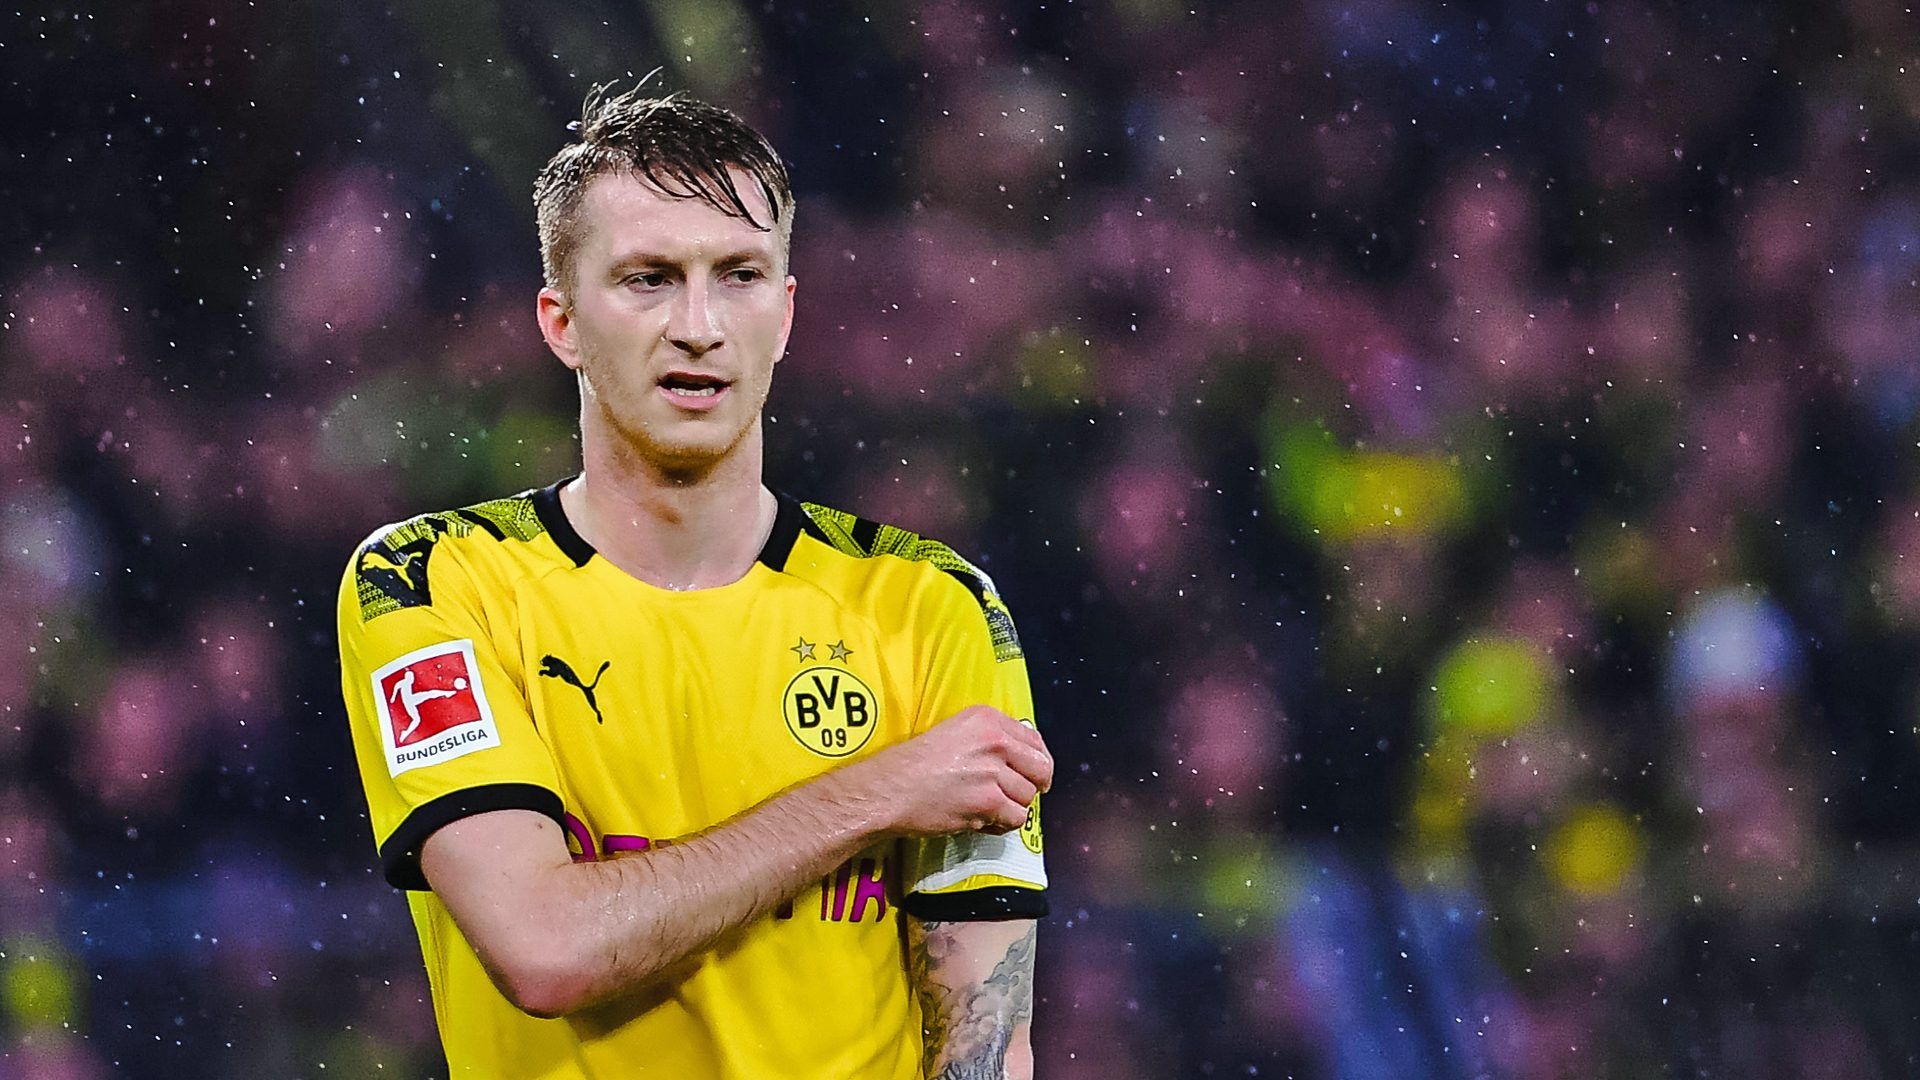 Bundesliga. Marco Reus: Borussia Dortmund not there yet, but we want to be top!